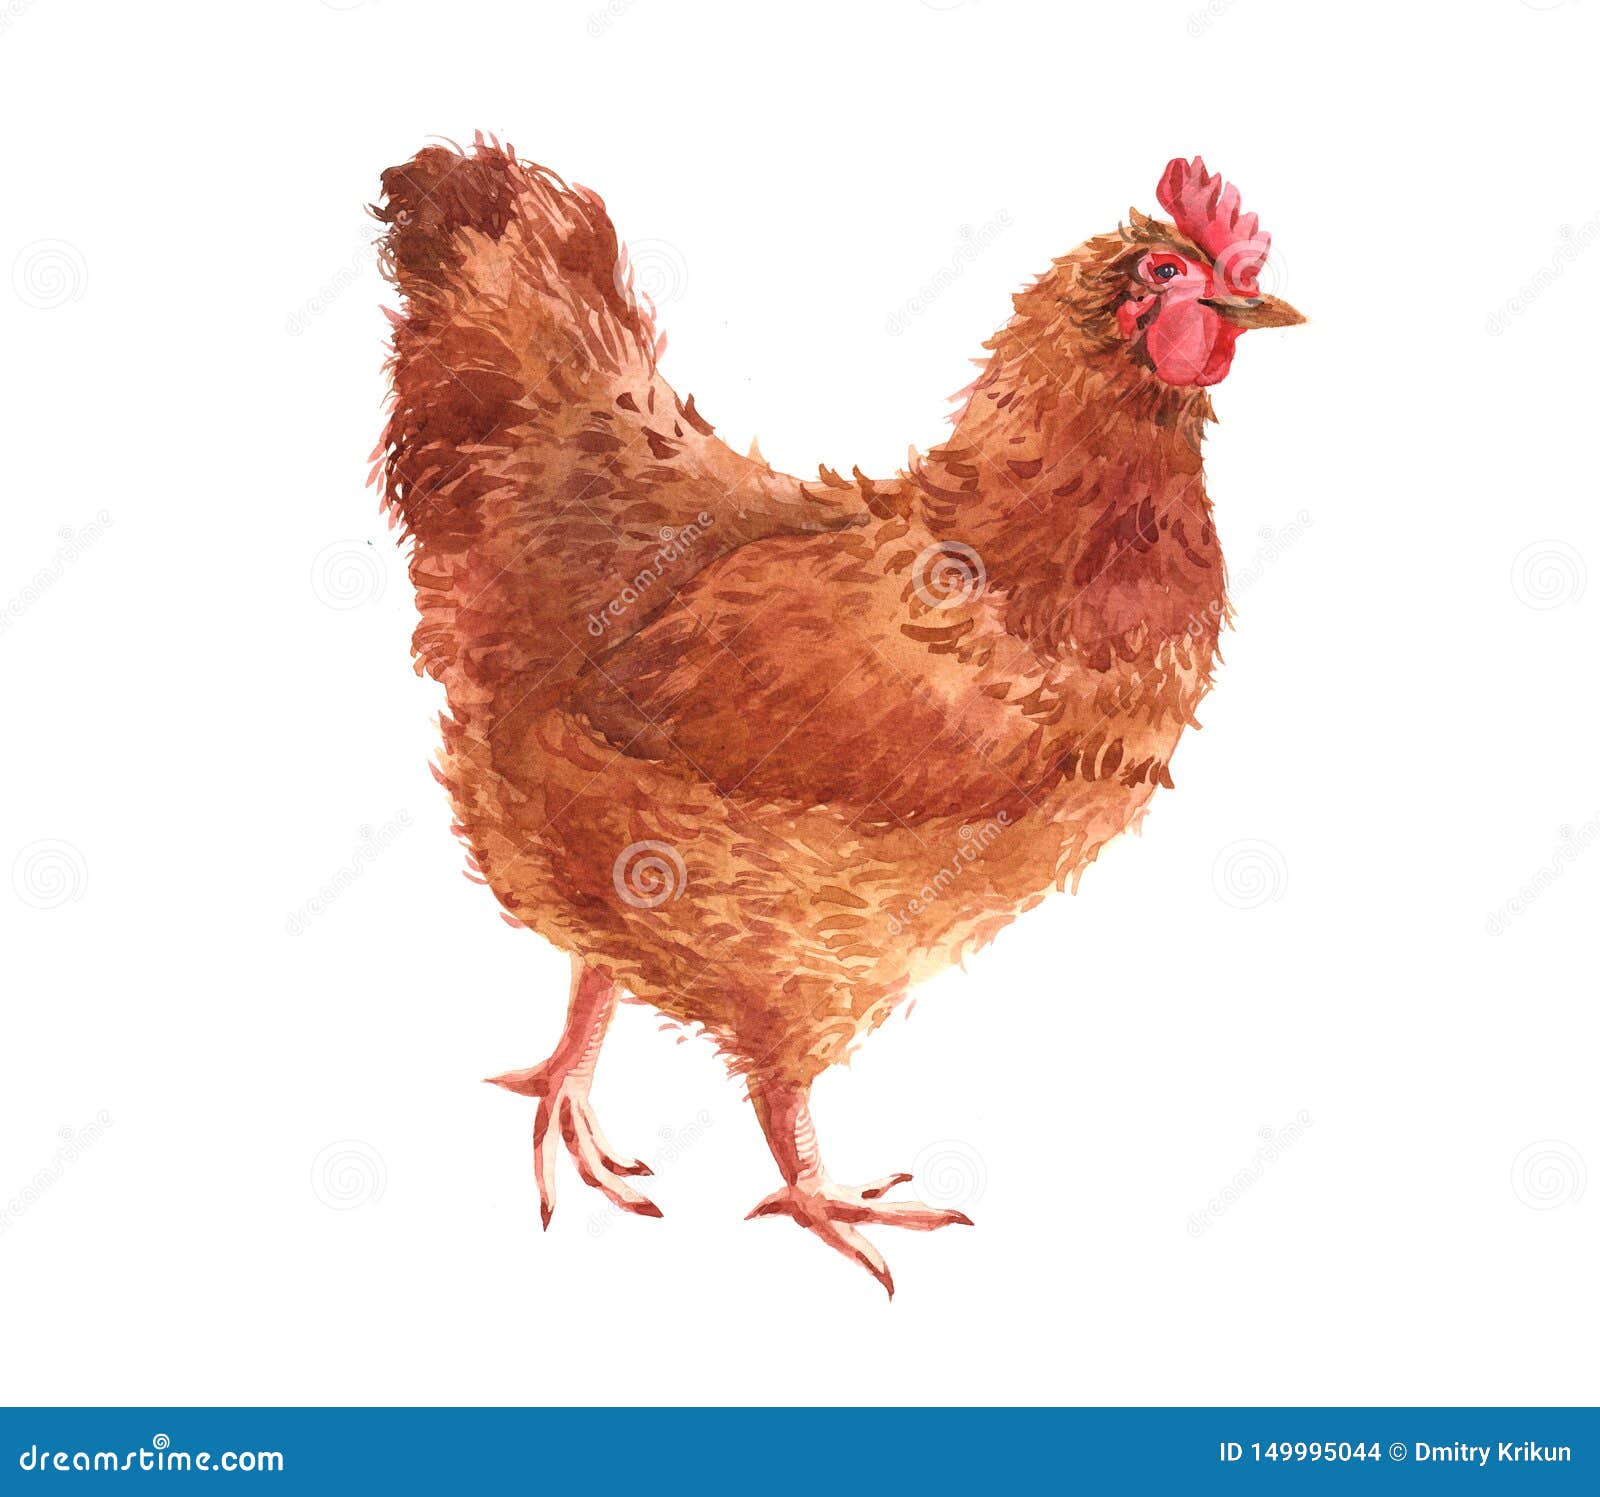 https://thumbs.dreamstime.com/z/watercolor-chicken-cock-rooster-bird-isolated-watercolor-chicken-cock-rooster-bird-isolated-white-background-149995044.jpg